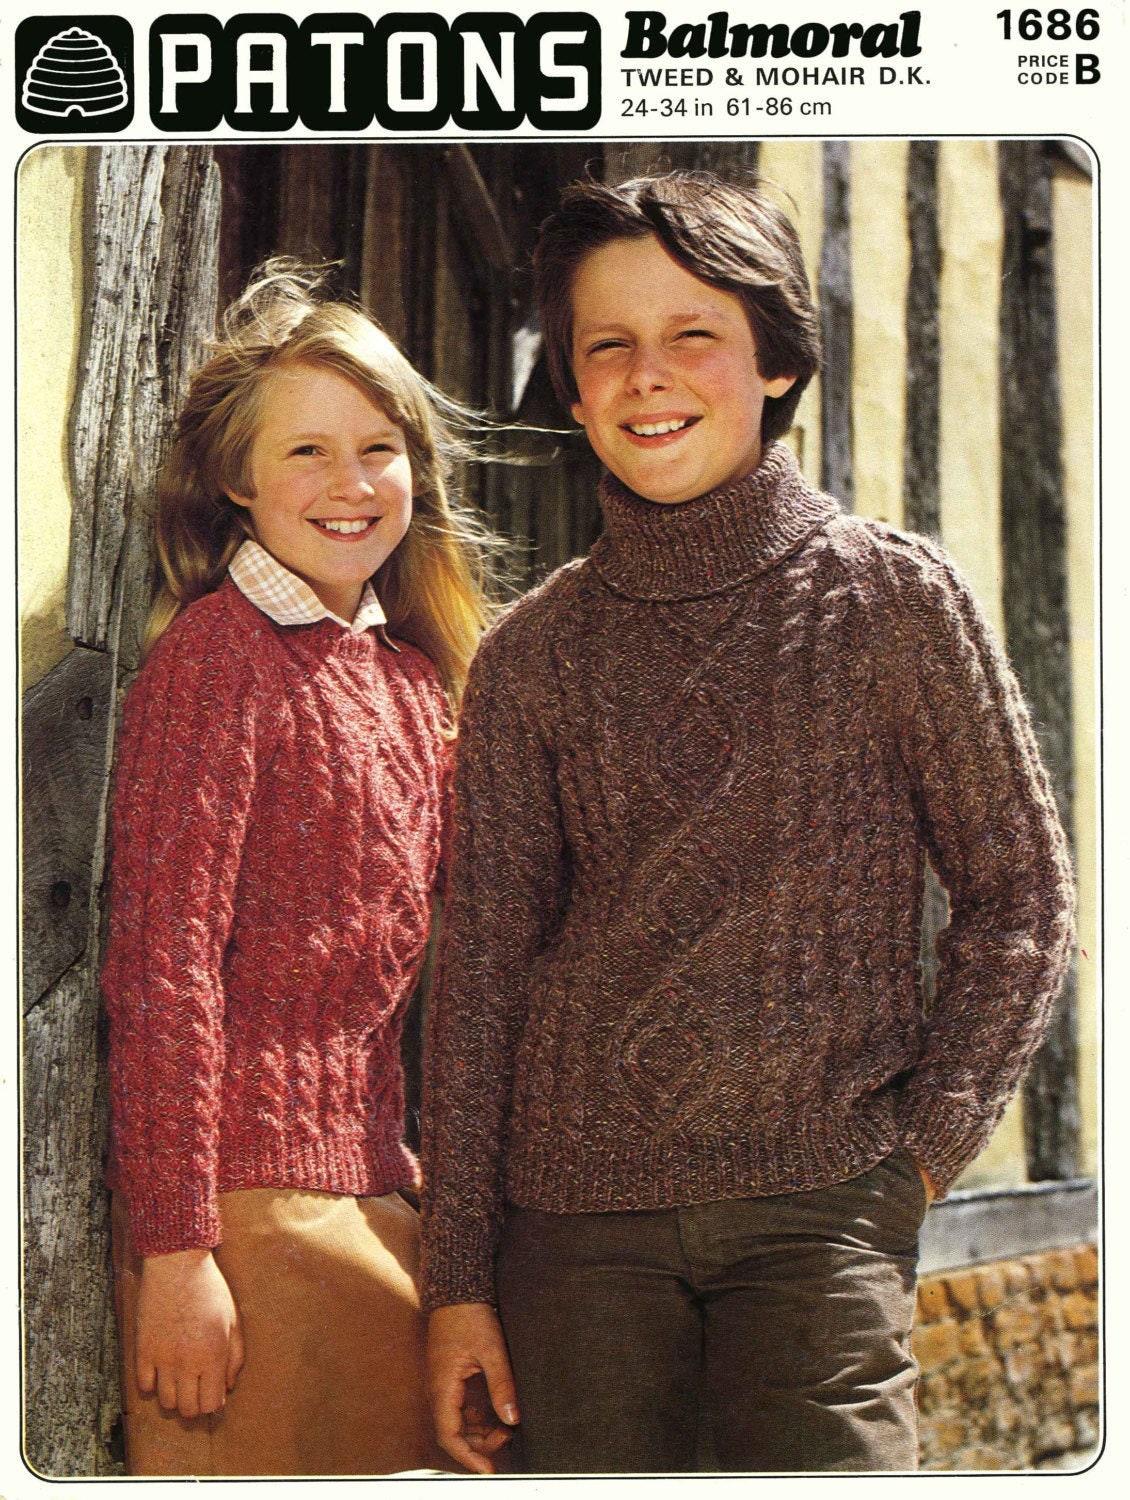 Girl and Boy round or Polo neck Jumper / Sweater, 24"-34" Chest, DK, 80s Knitting Pattern, Patons 1686